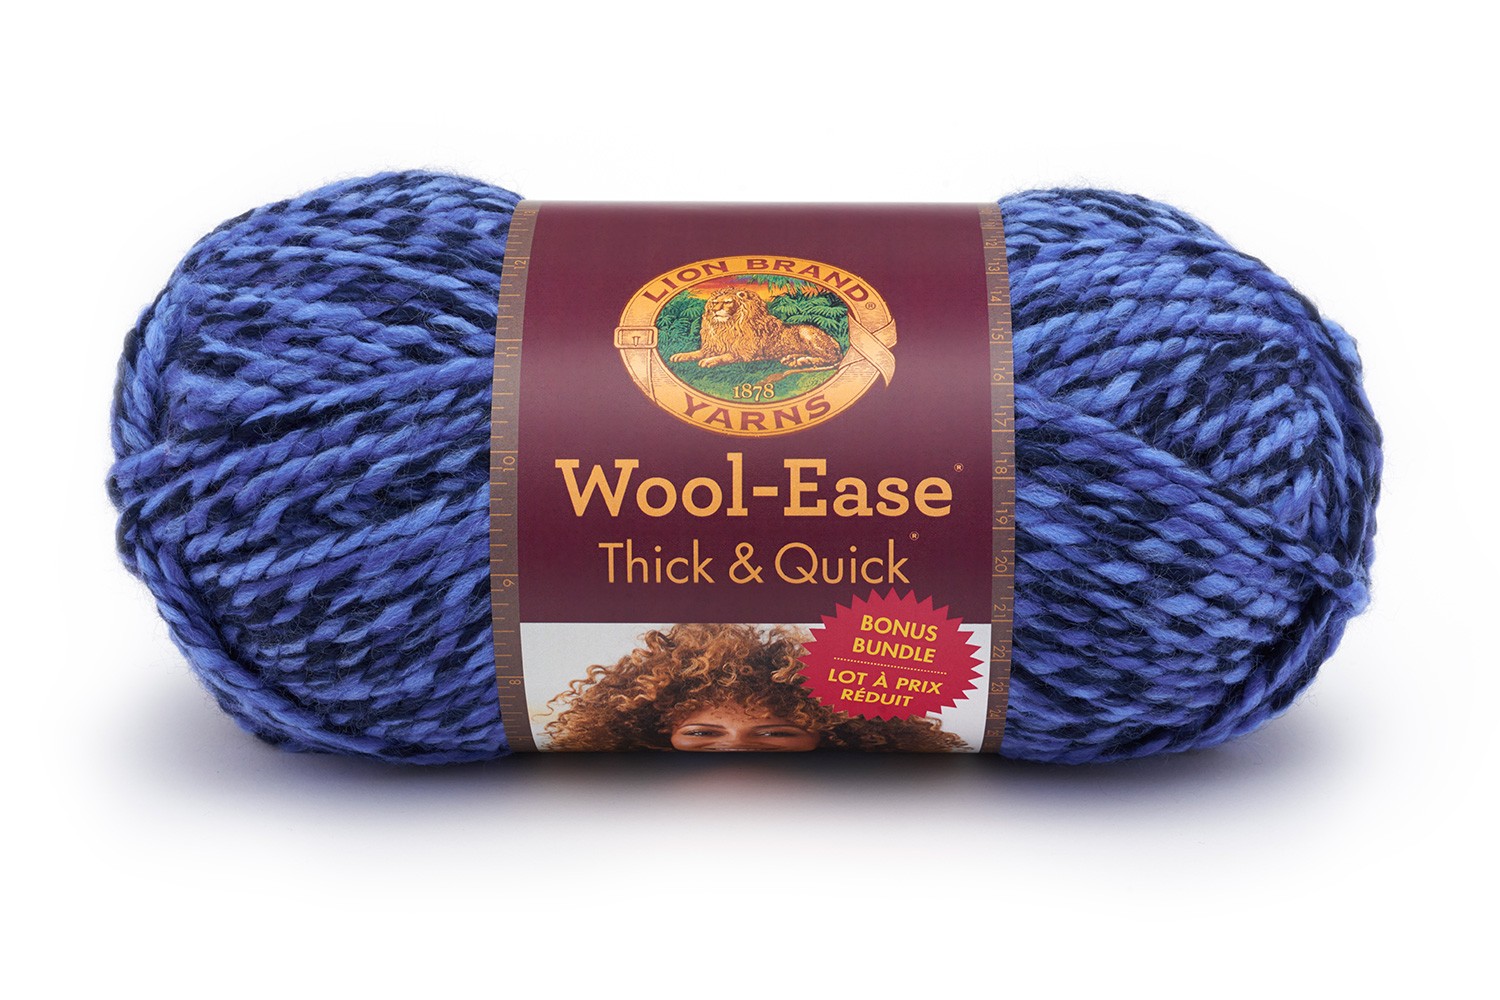 Wool-Ease Thick & Quick Acai